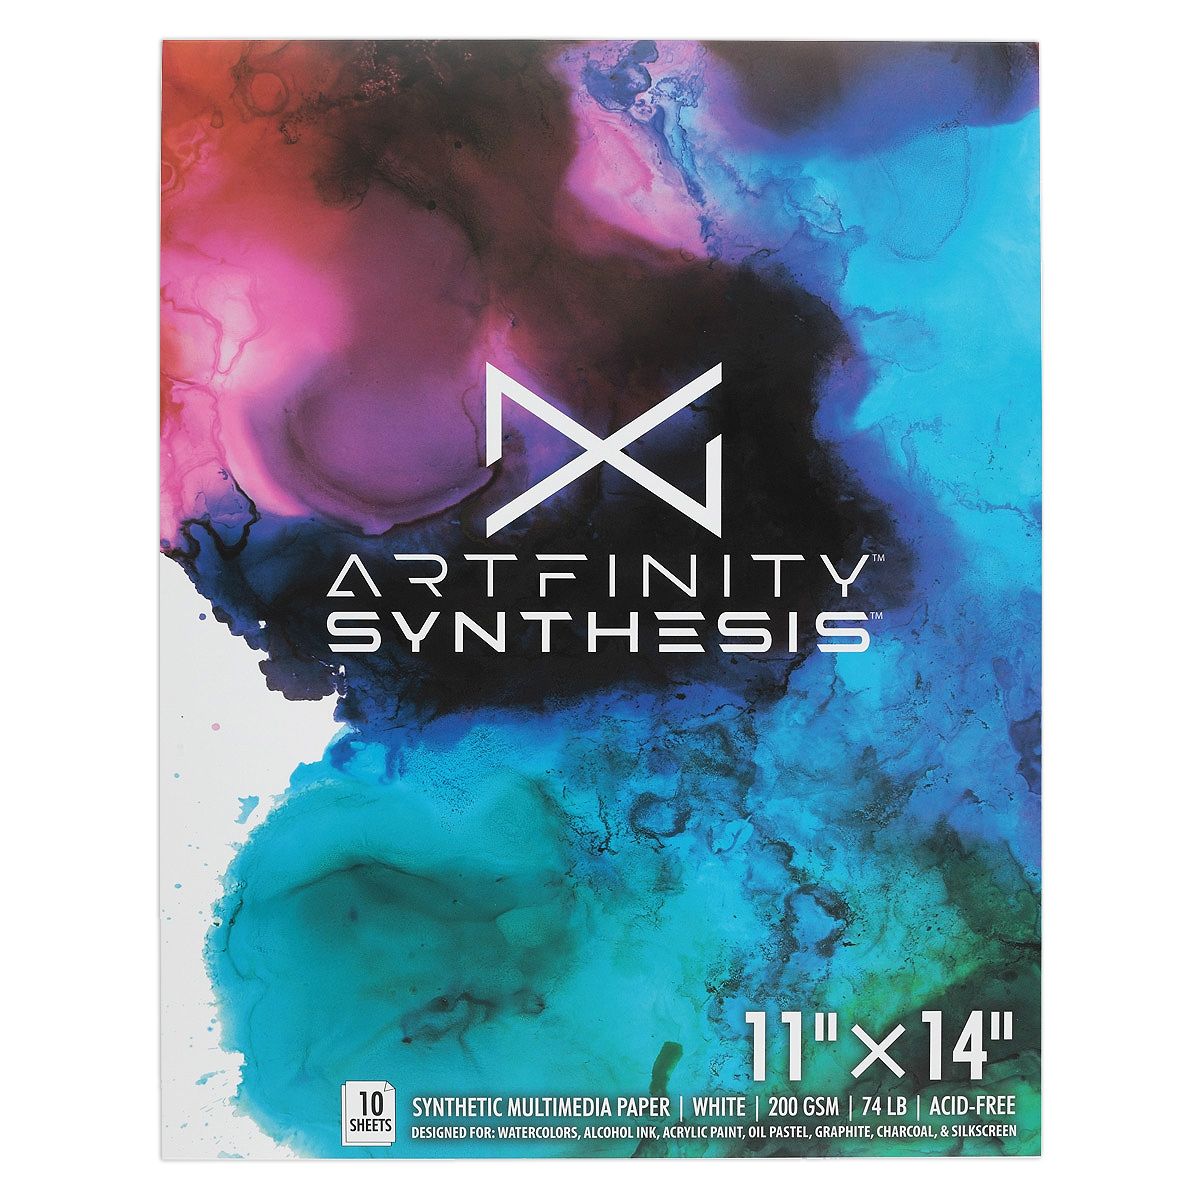 11X14" Artfinity Synthesis Multimedia Watercolor Paper Pad